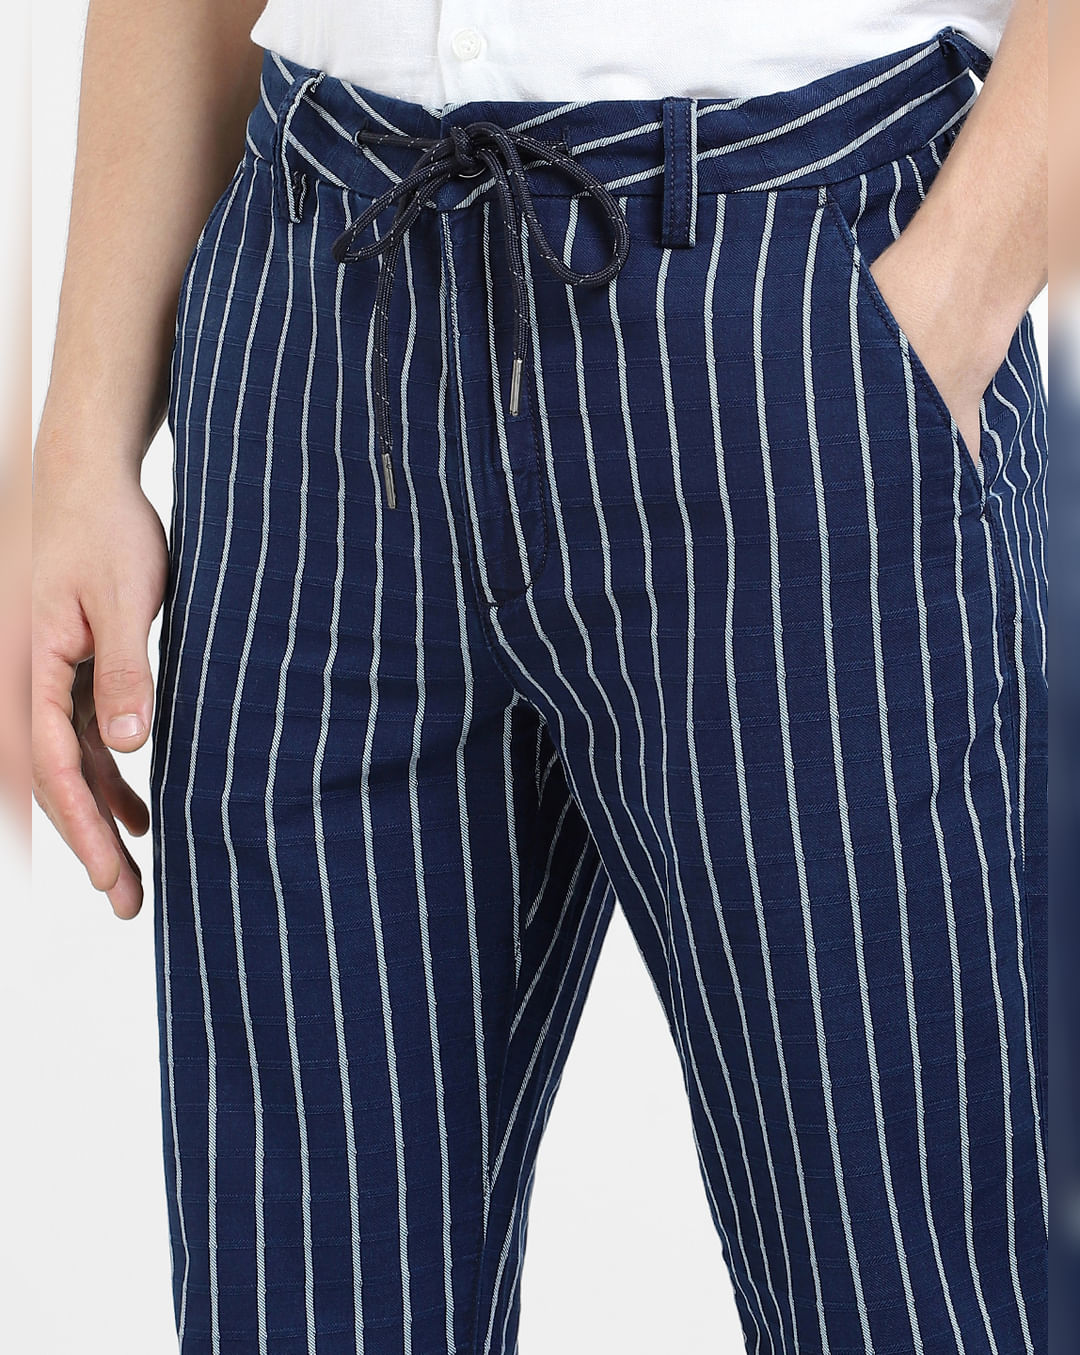 Buy Navy Blue Mid Rise Striped Pants for Men